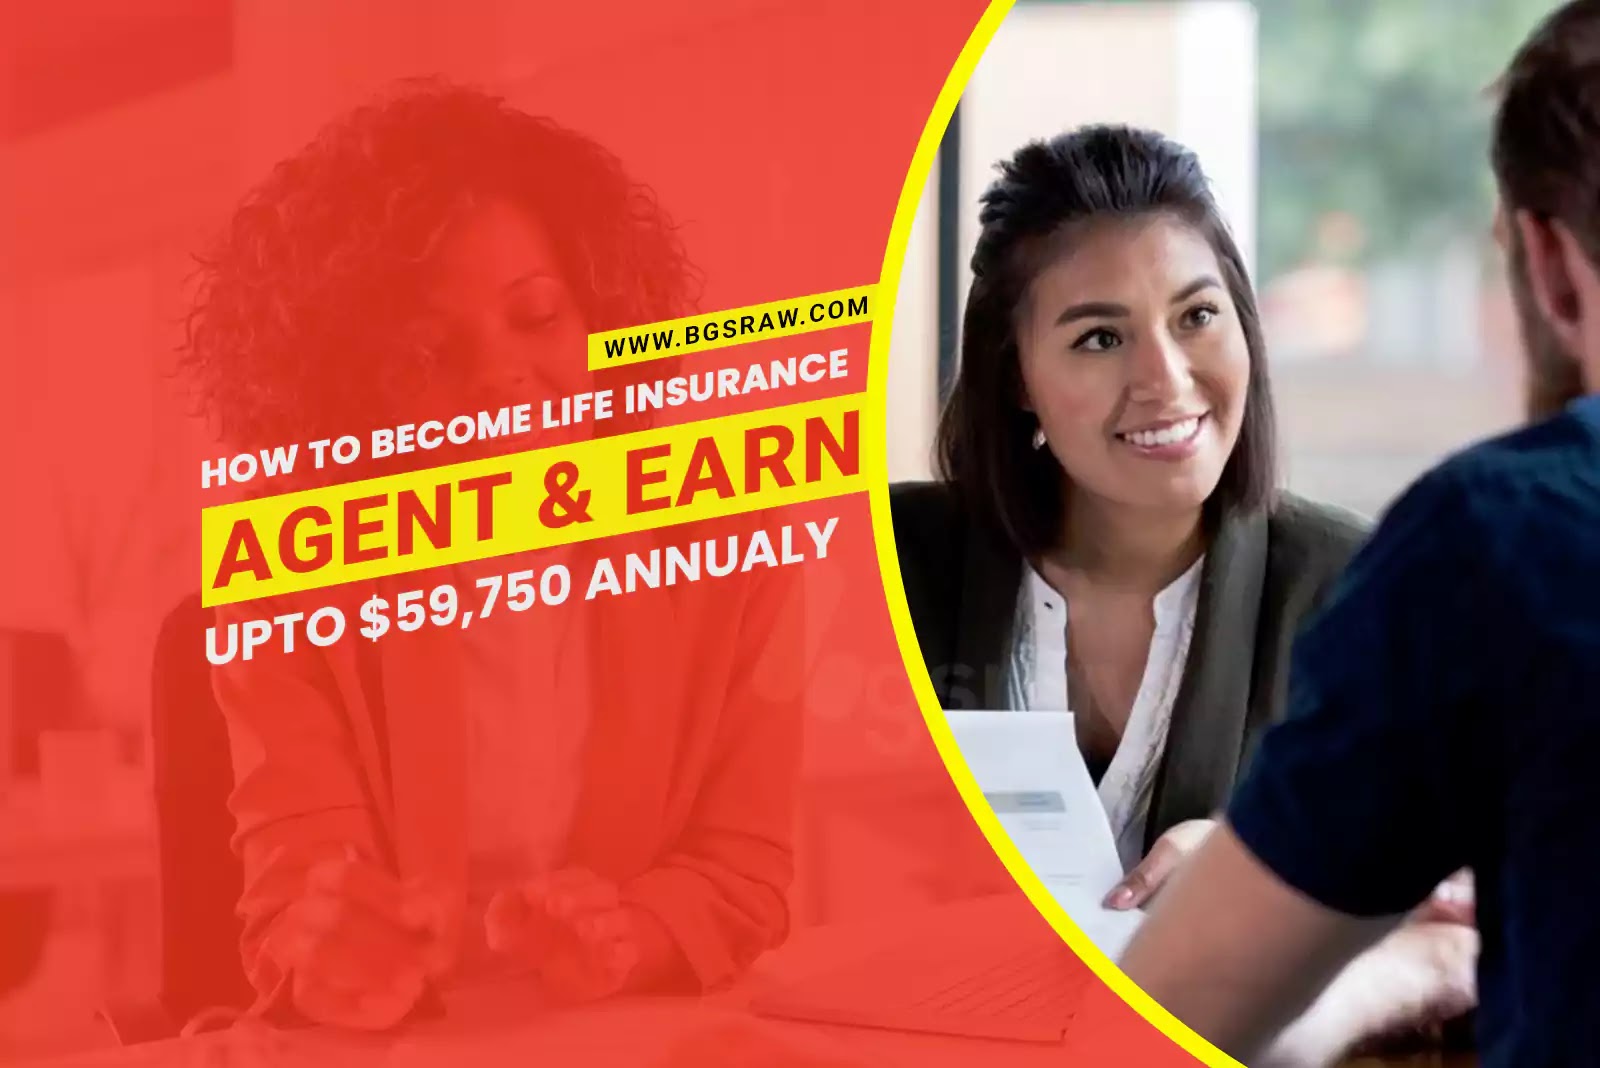 How to Become Life Insurance Agent in California and earn upto $59,750 Annualy